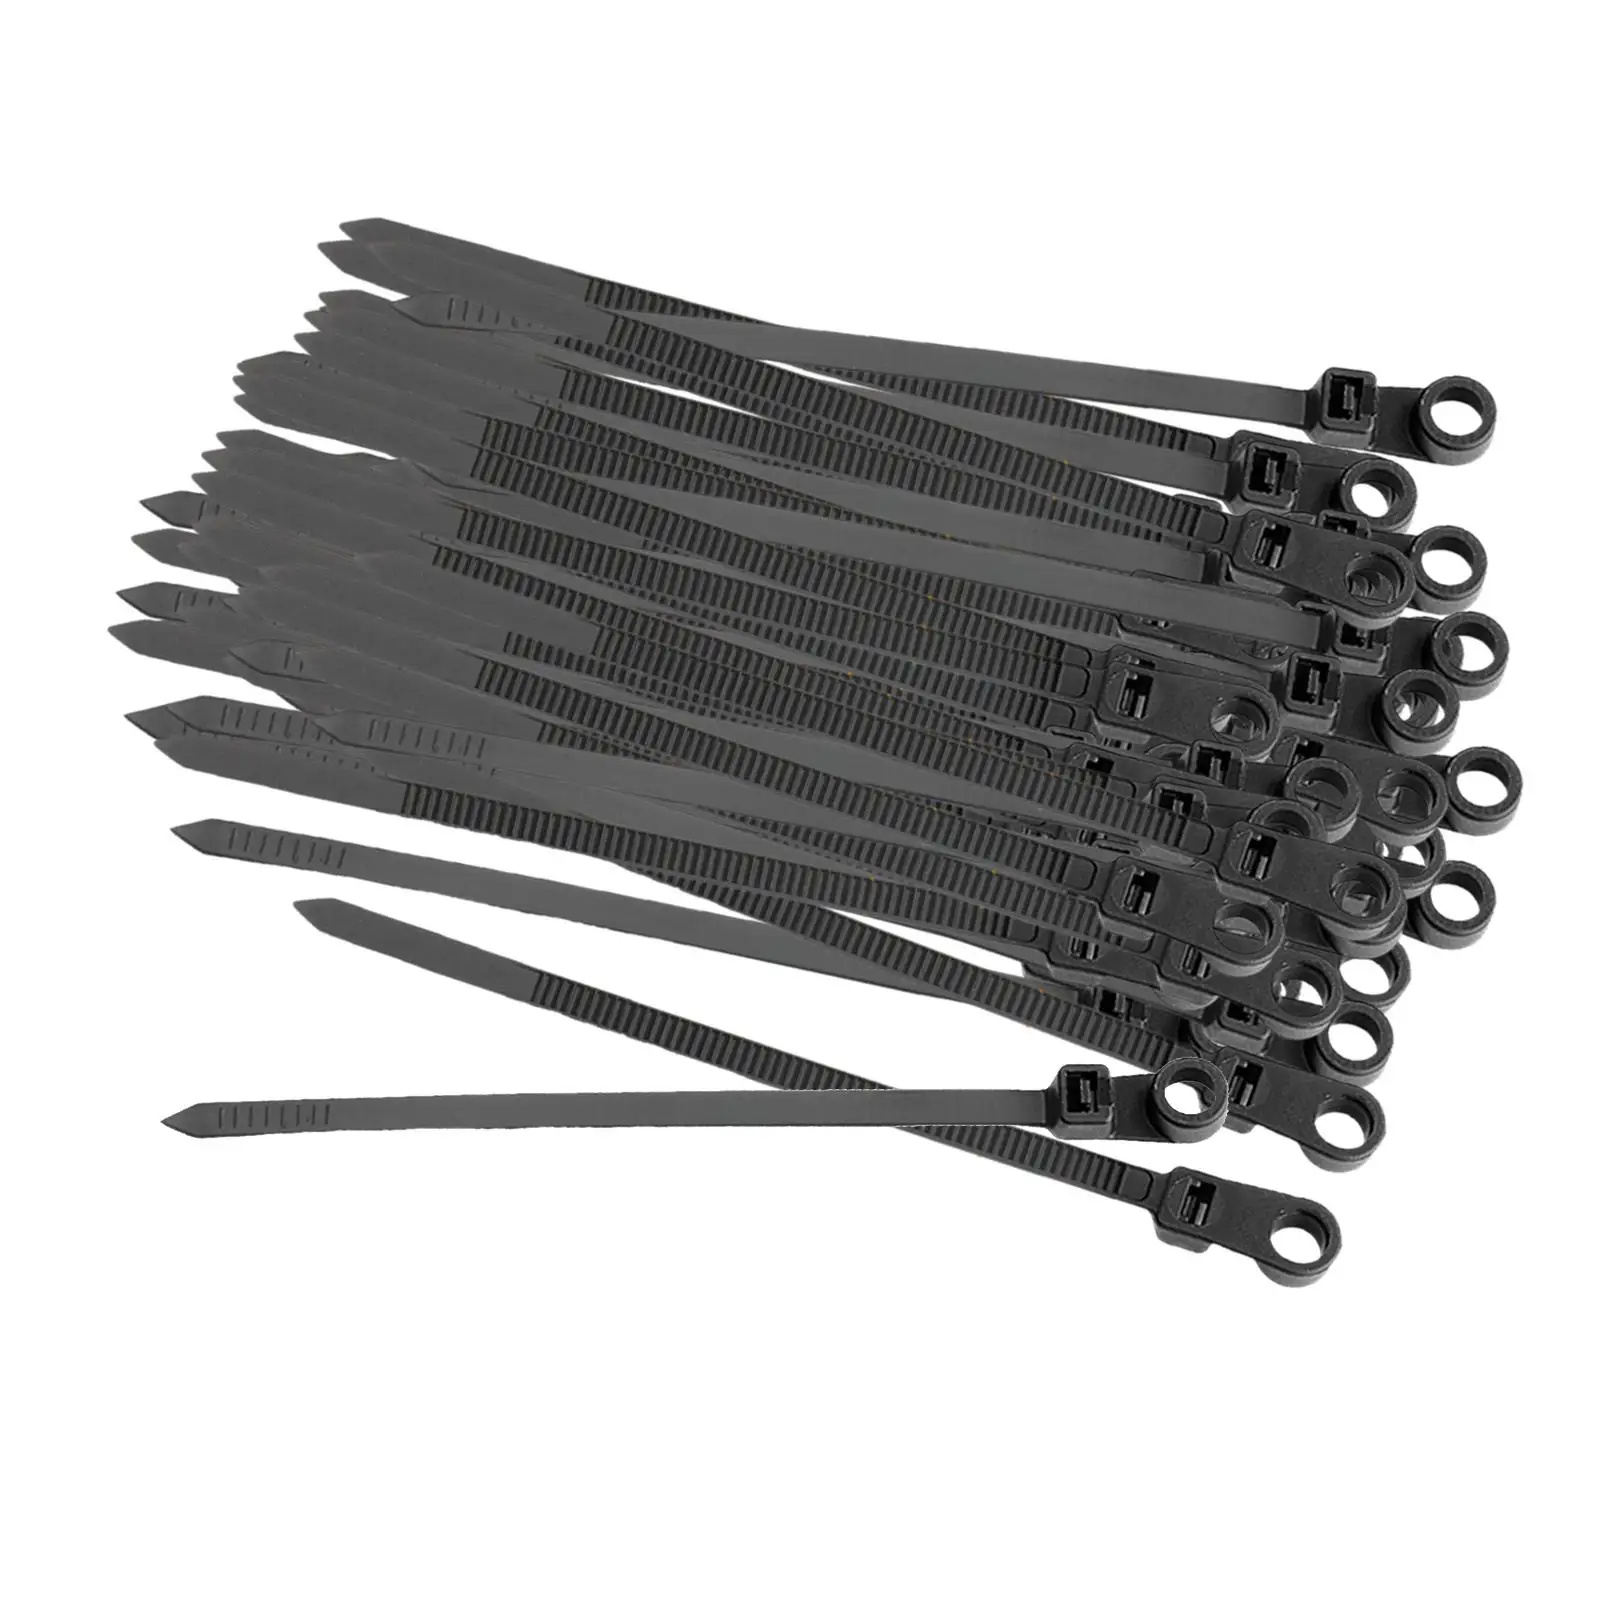 100Pcs Nylon Cable Wire Zip Ties Mounting Hole Heavy Duty Cable Zips Wire Tie Wraps for Office Garden Indoor Outdoor Garage Home